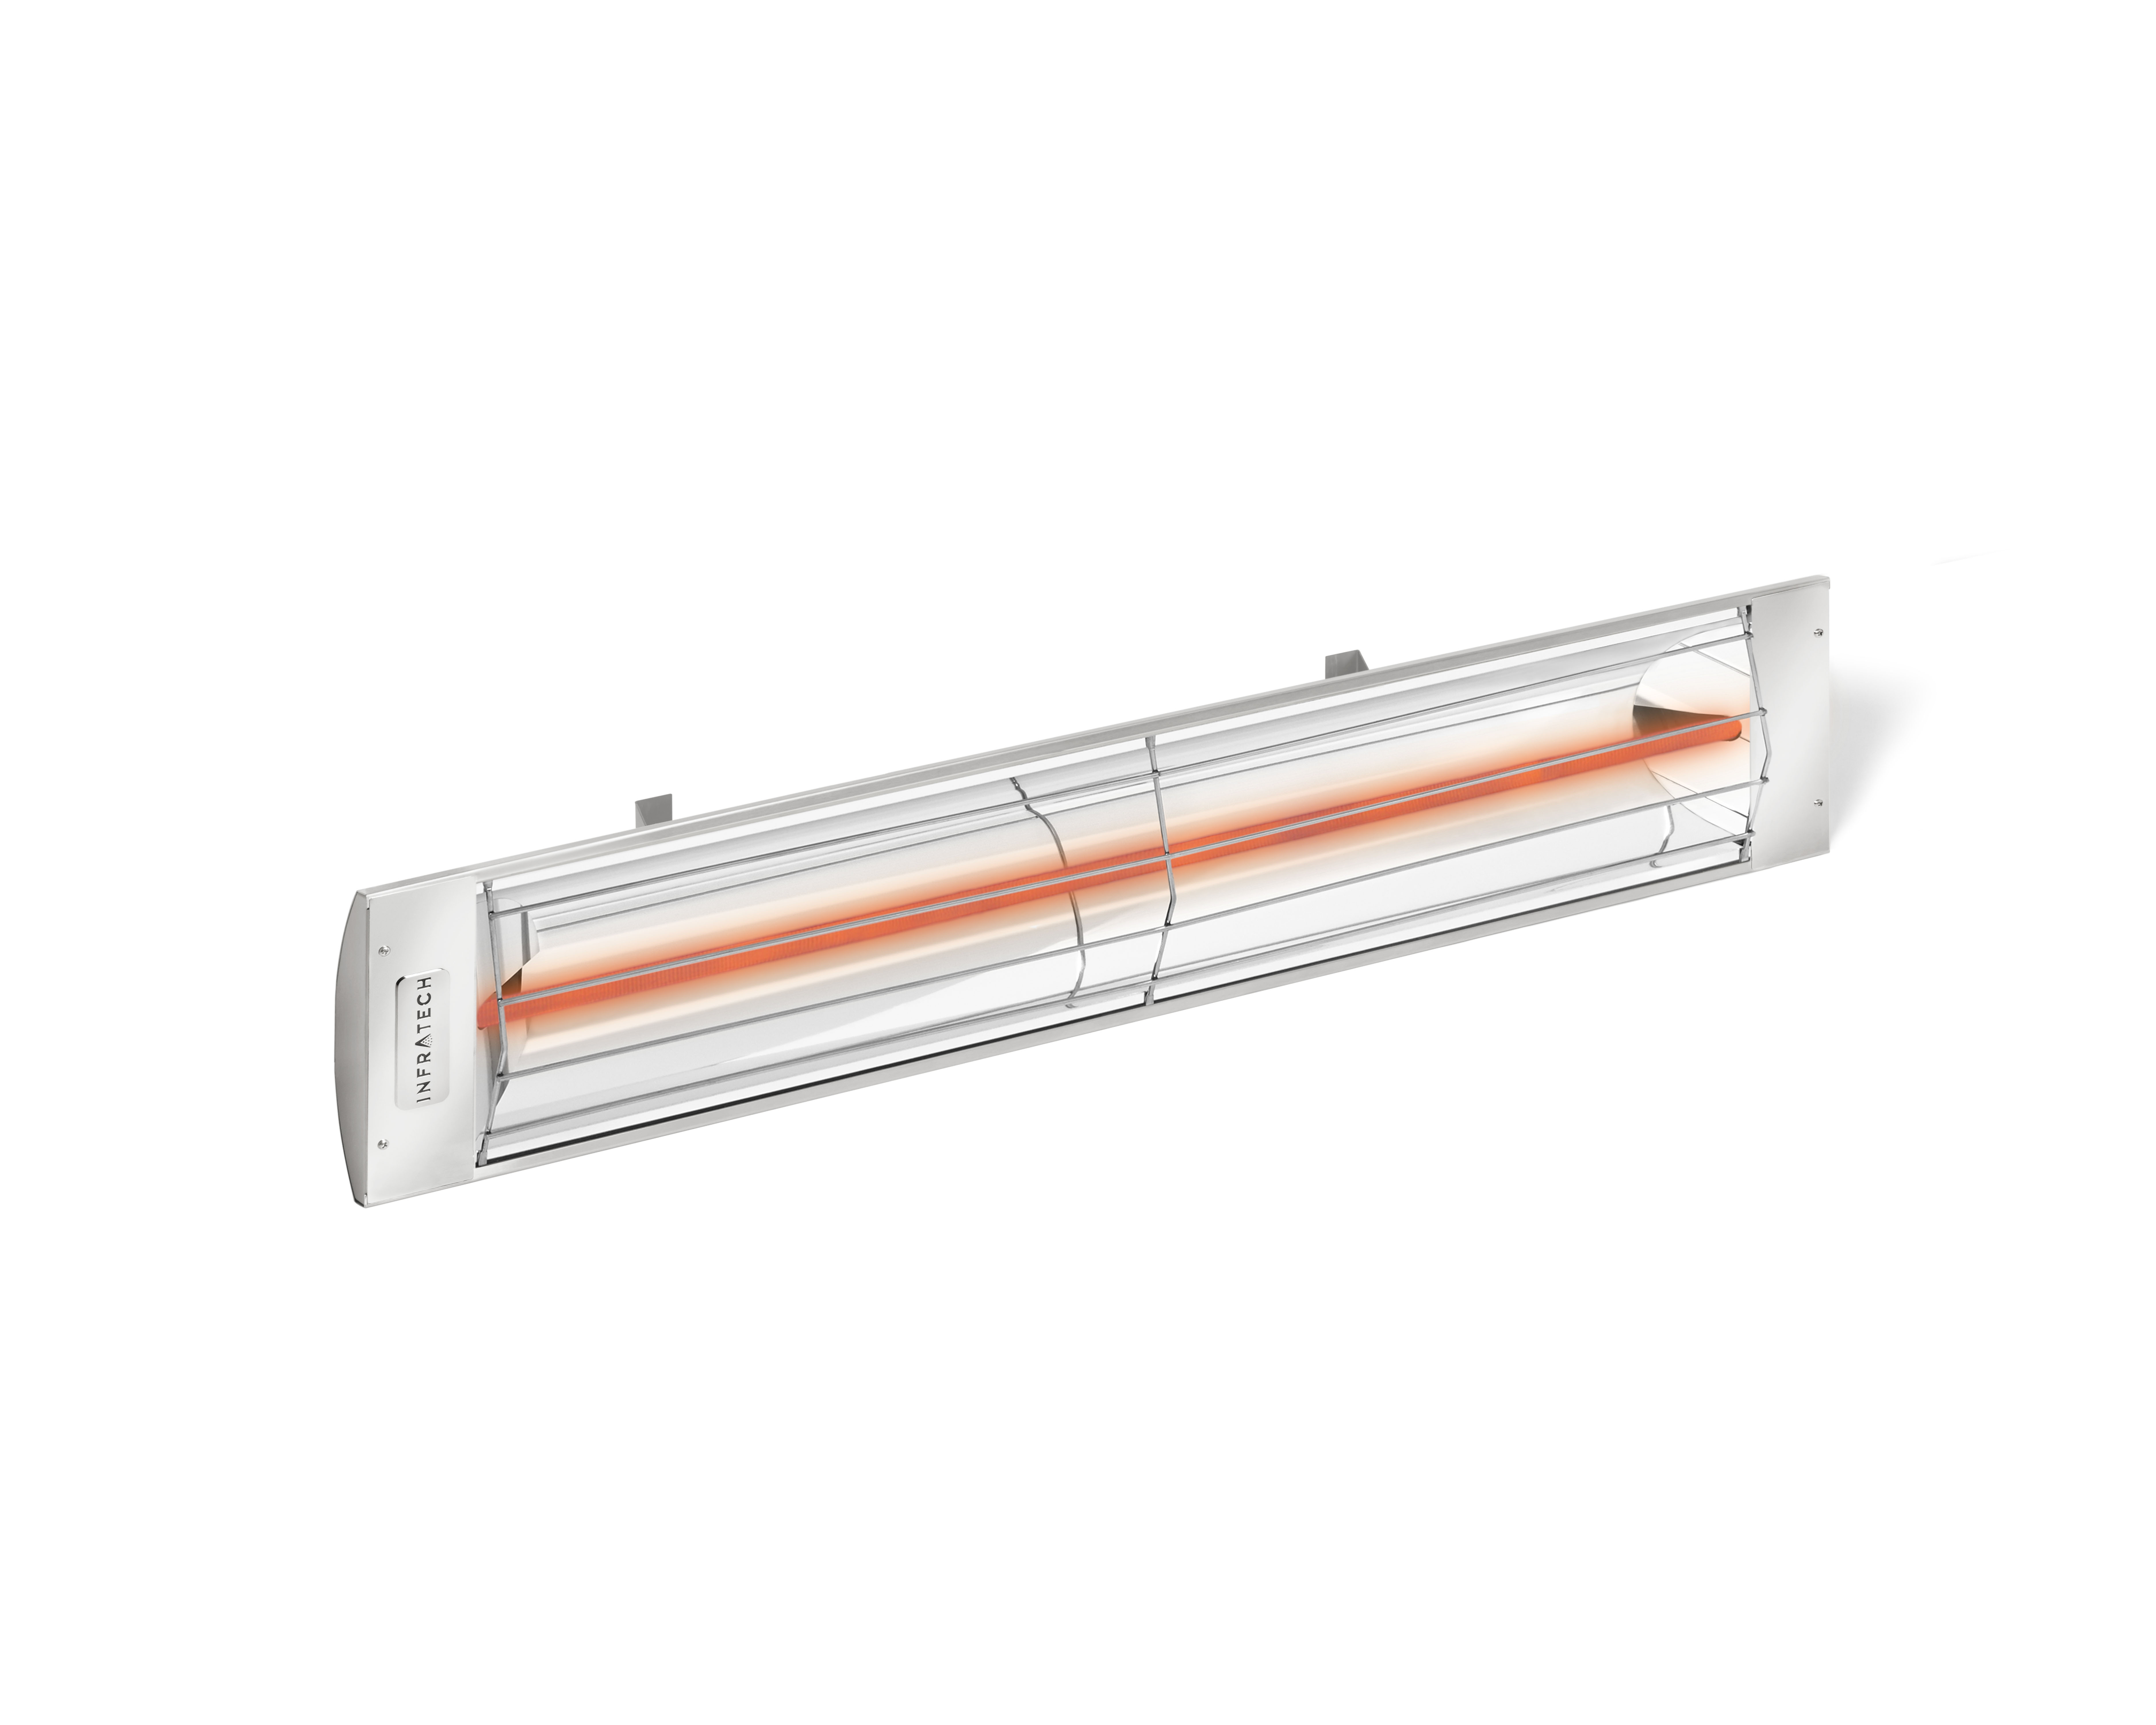 C and W Series Single Element Heaters